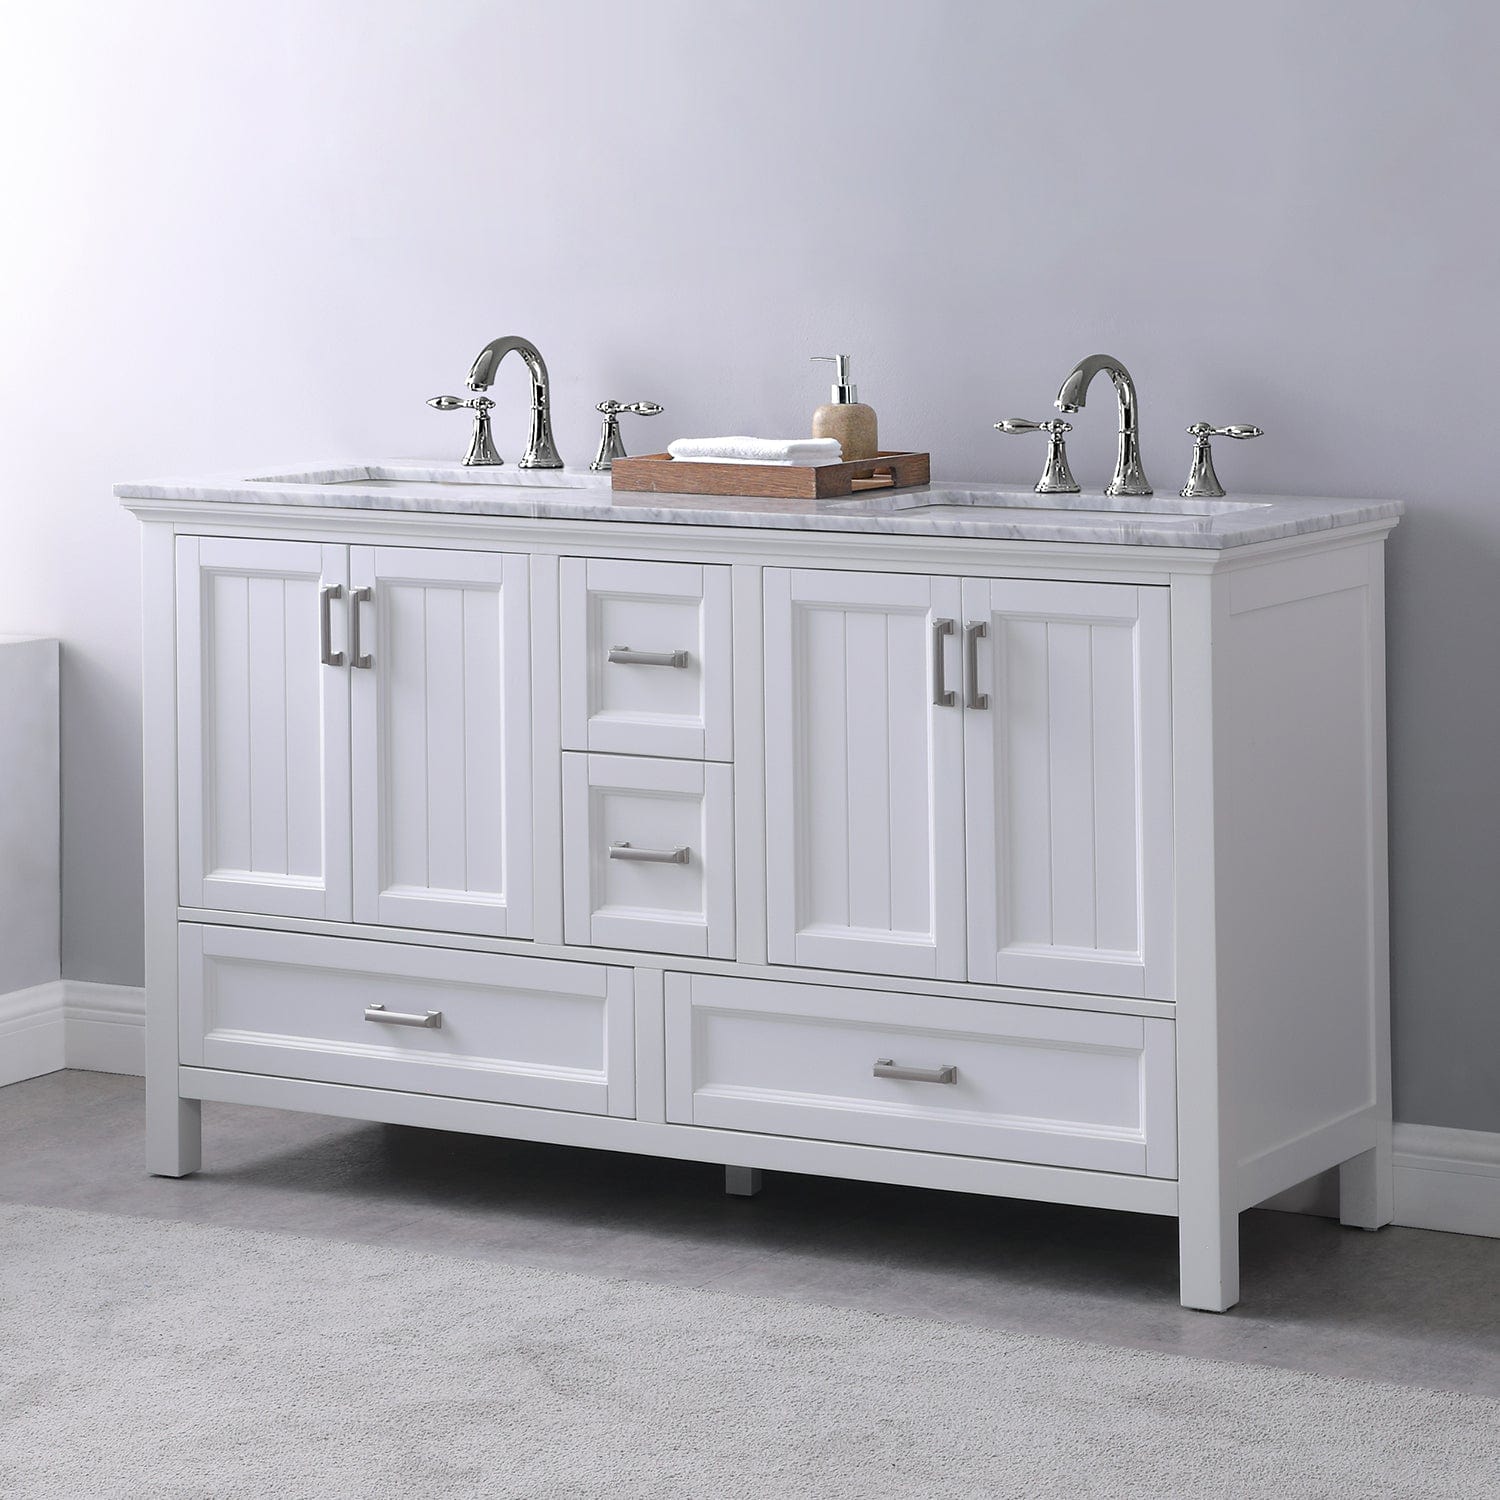 Altair Isla 60" Double Bathroom Vanity Set in White and Carrara White Marble Countertop without Mirror 538060-WH-CA-NM - Molaix631112970945Vanity538060-WH-CA-NM